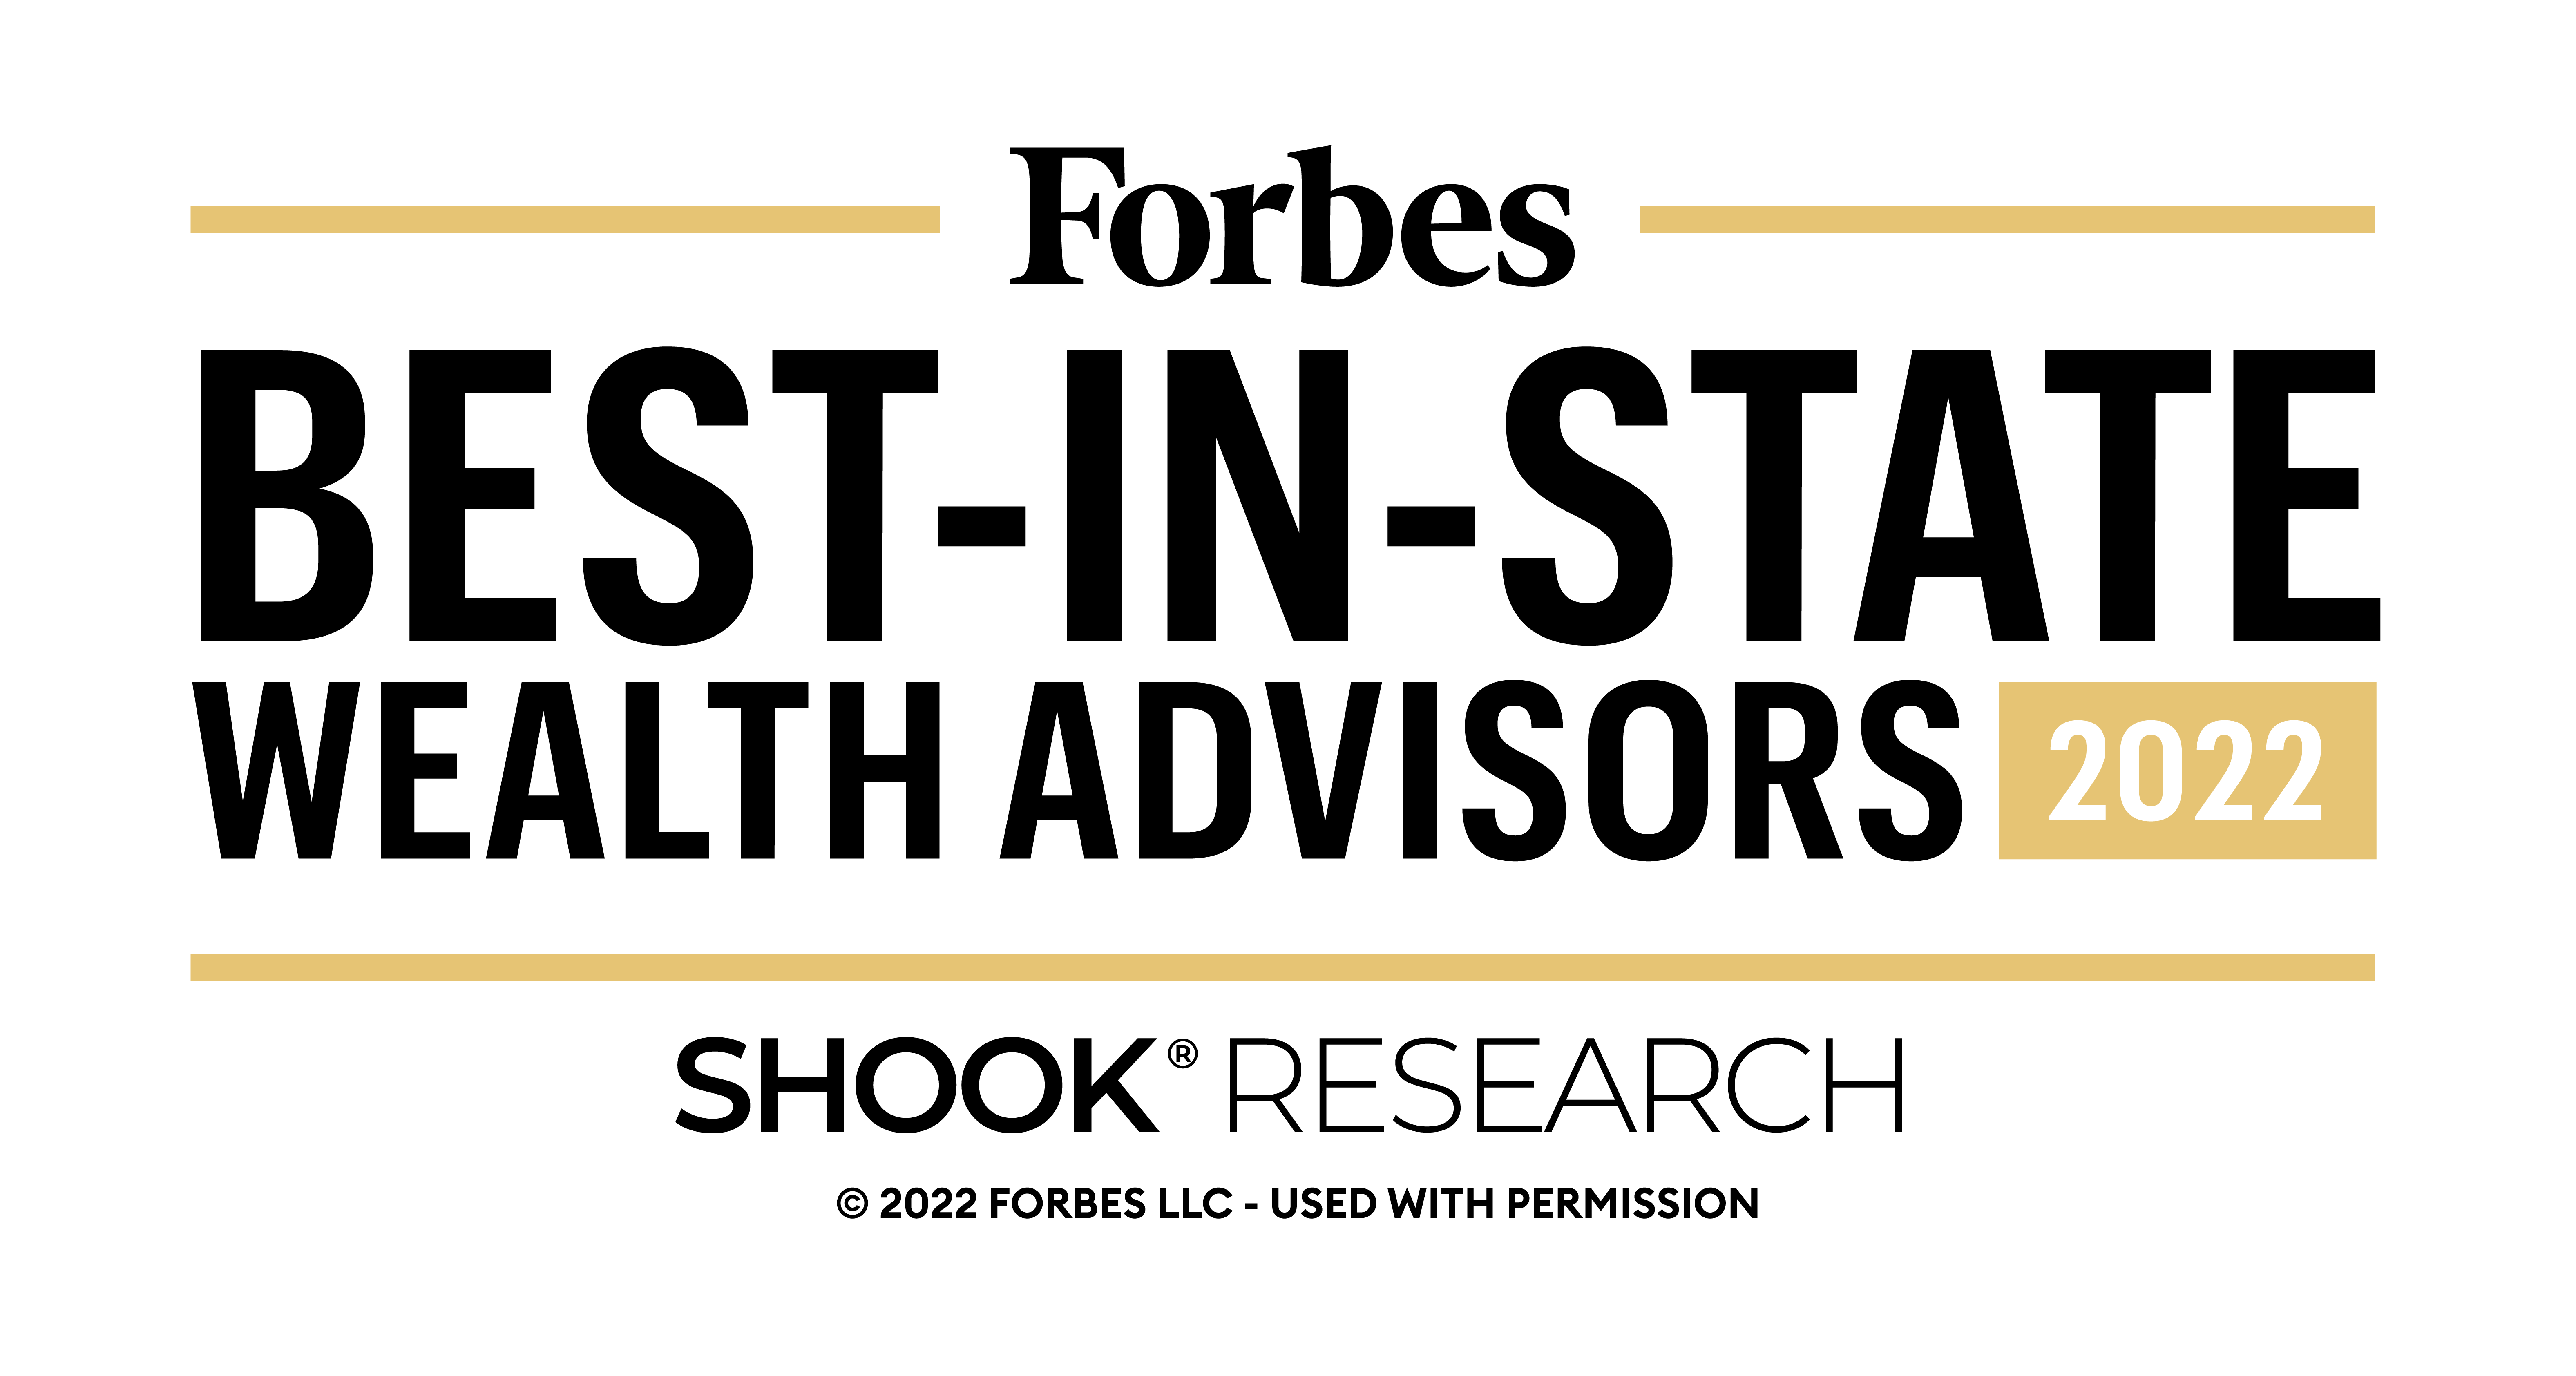 Forbes Best-in-State Wealth Advisors 2022